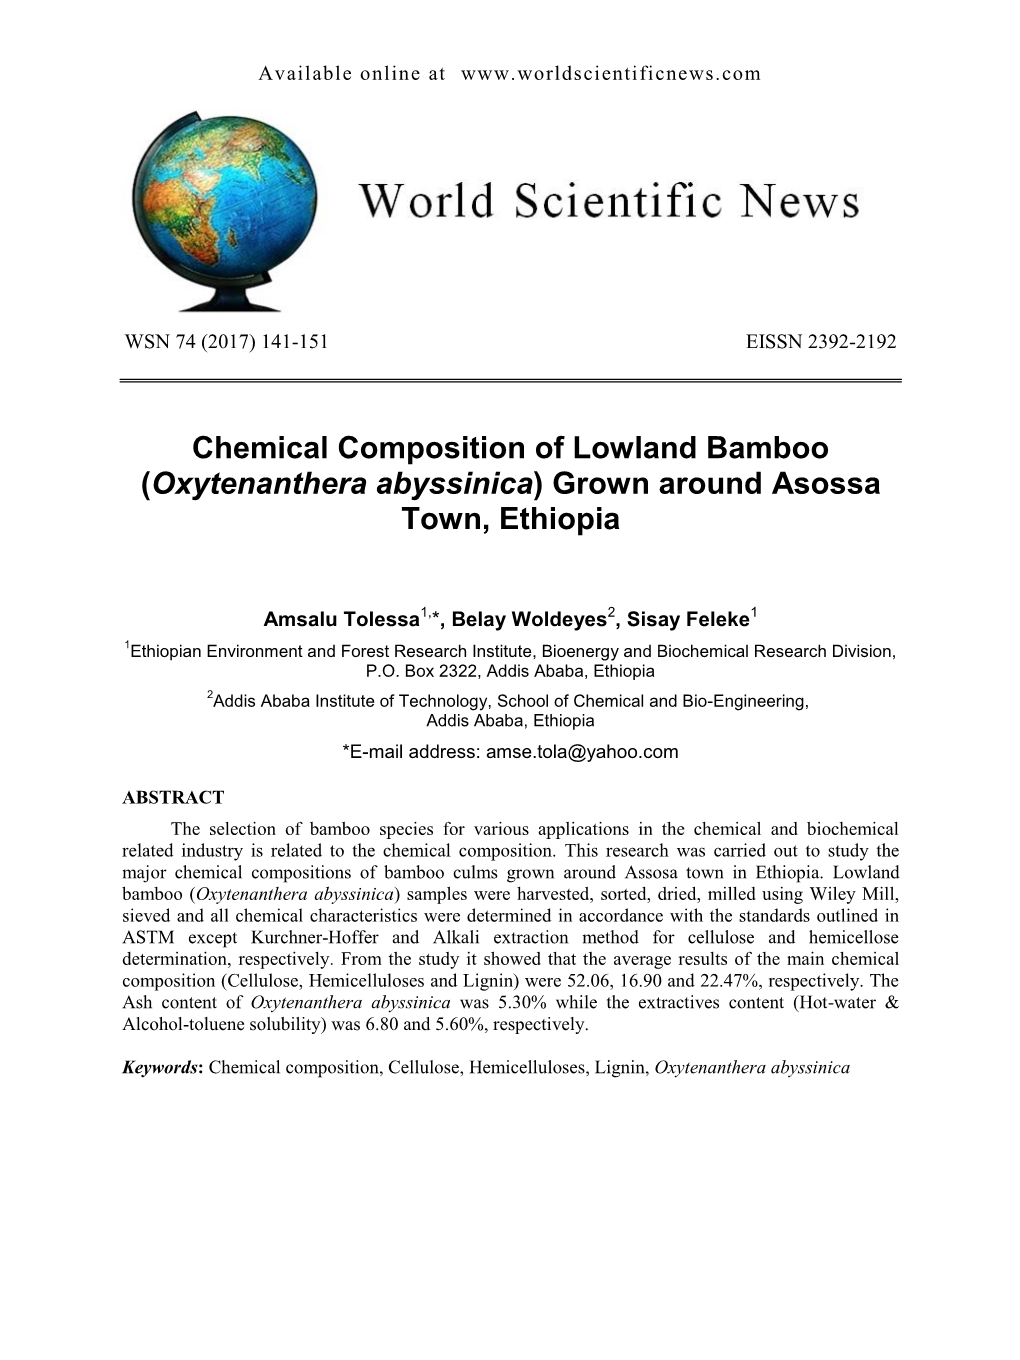 Chemical Composition of Lowland Bamboo (Oxytenanthera Abyssinica) Grown Around Asossa Town, Ethiopia